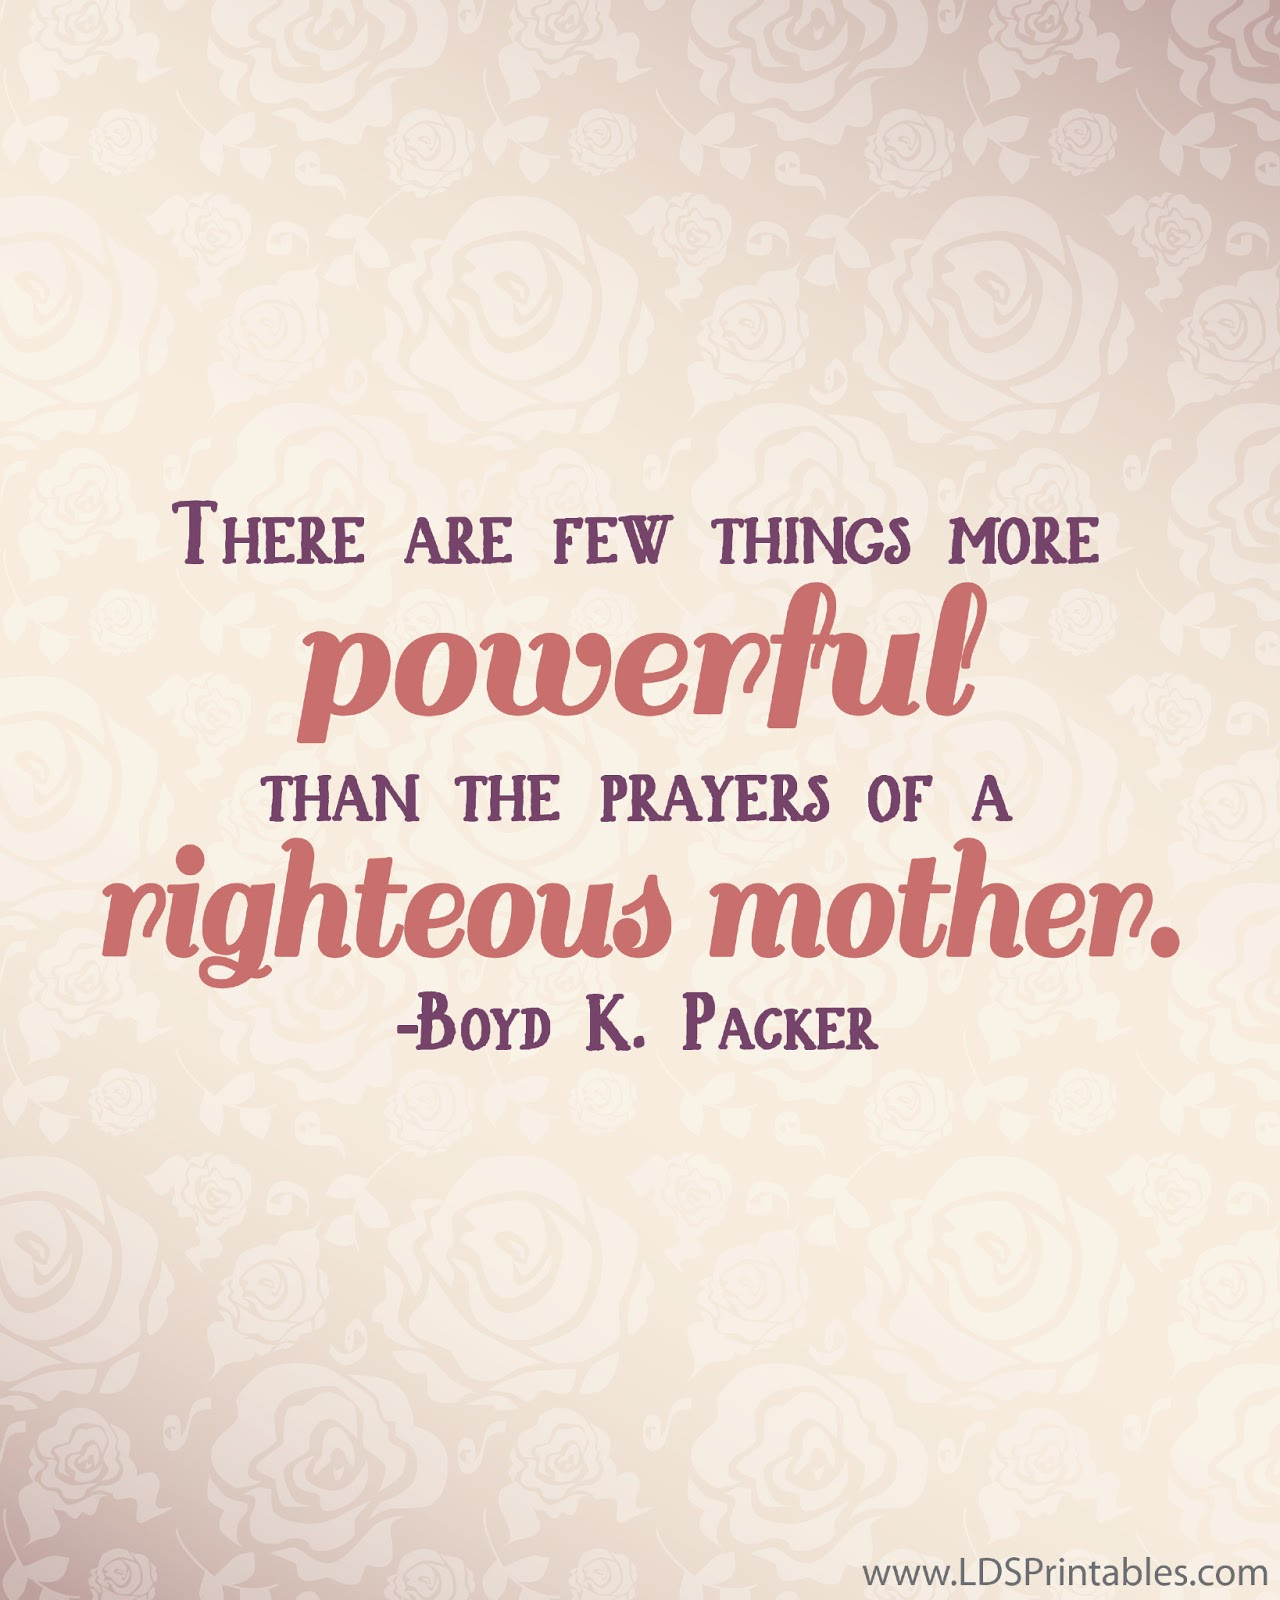 Quotes On Mother
 General Mothers Day Quotes QuotesGram